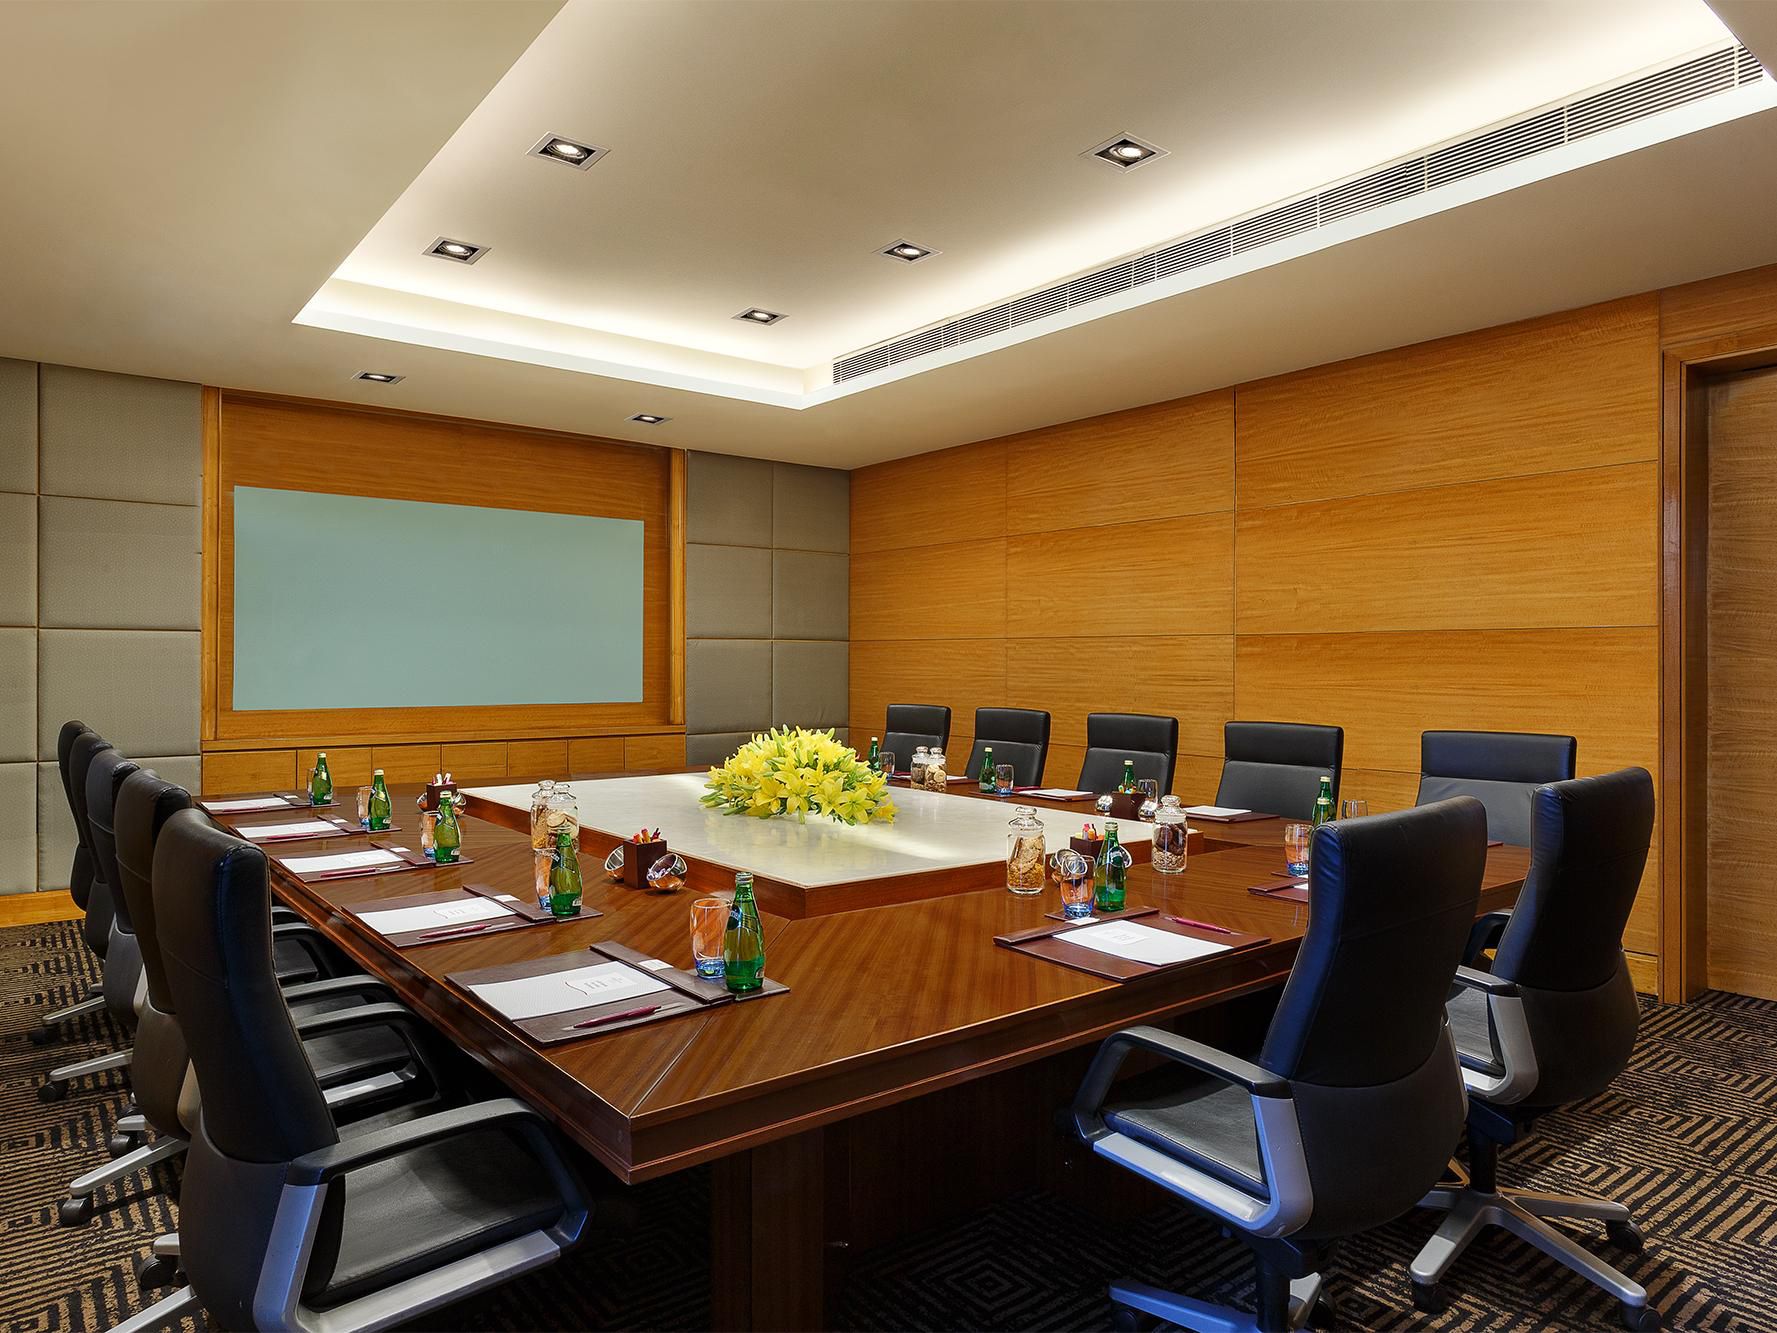 Crowne Plaza Today Gurugram provides you a perfect meeting space for all your professional solutions with the required audio-visuals, a soothing view with natural lighting and flexible sitting arrangements.